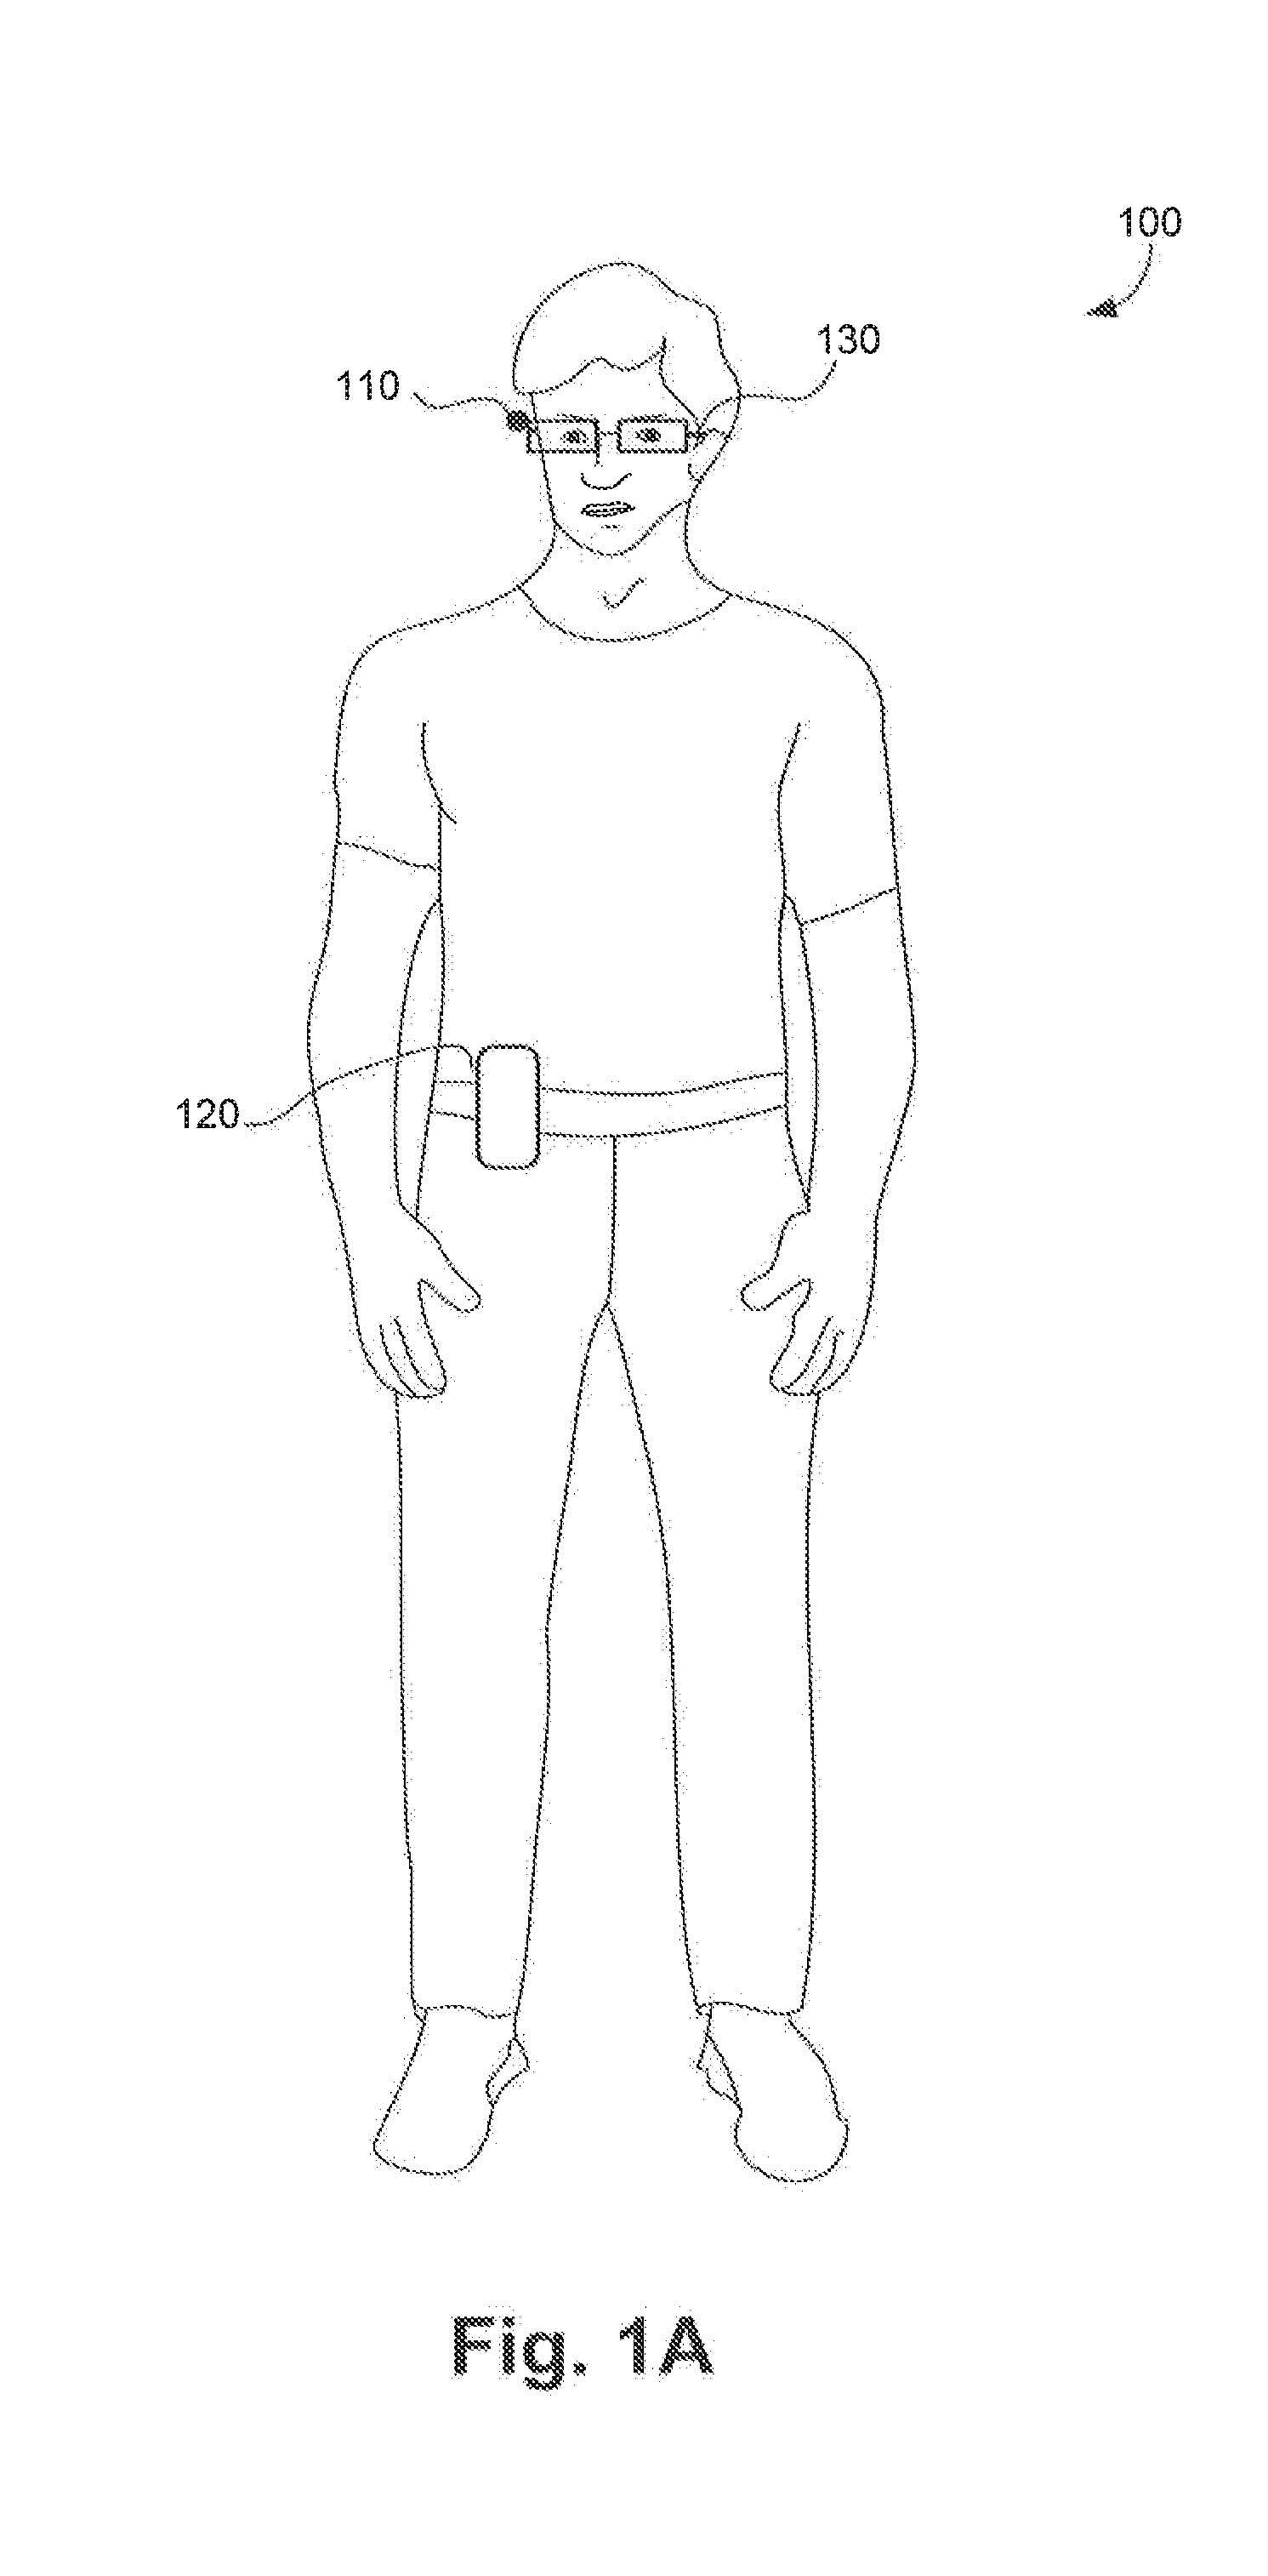 Wearable apparatus and method for capturing image data using multiple image sensors